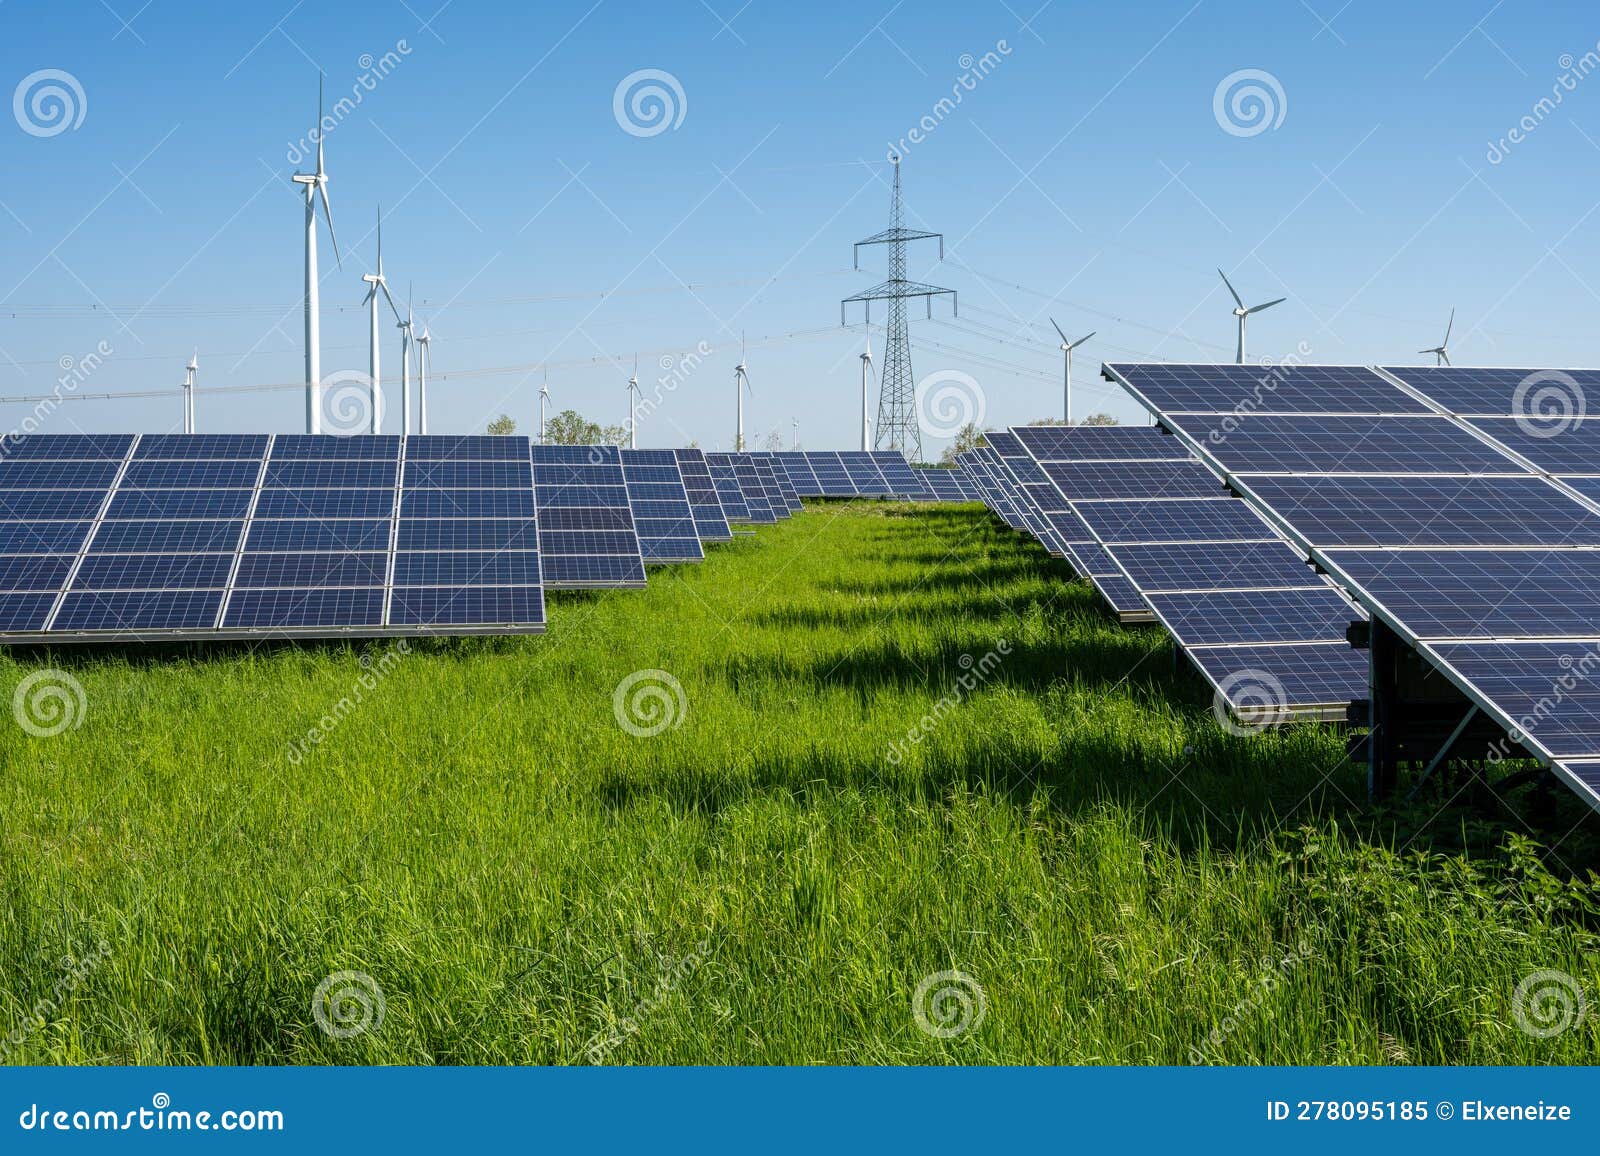 Solar panels, wind turbines and electricity pylons seen in Germany